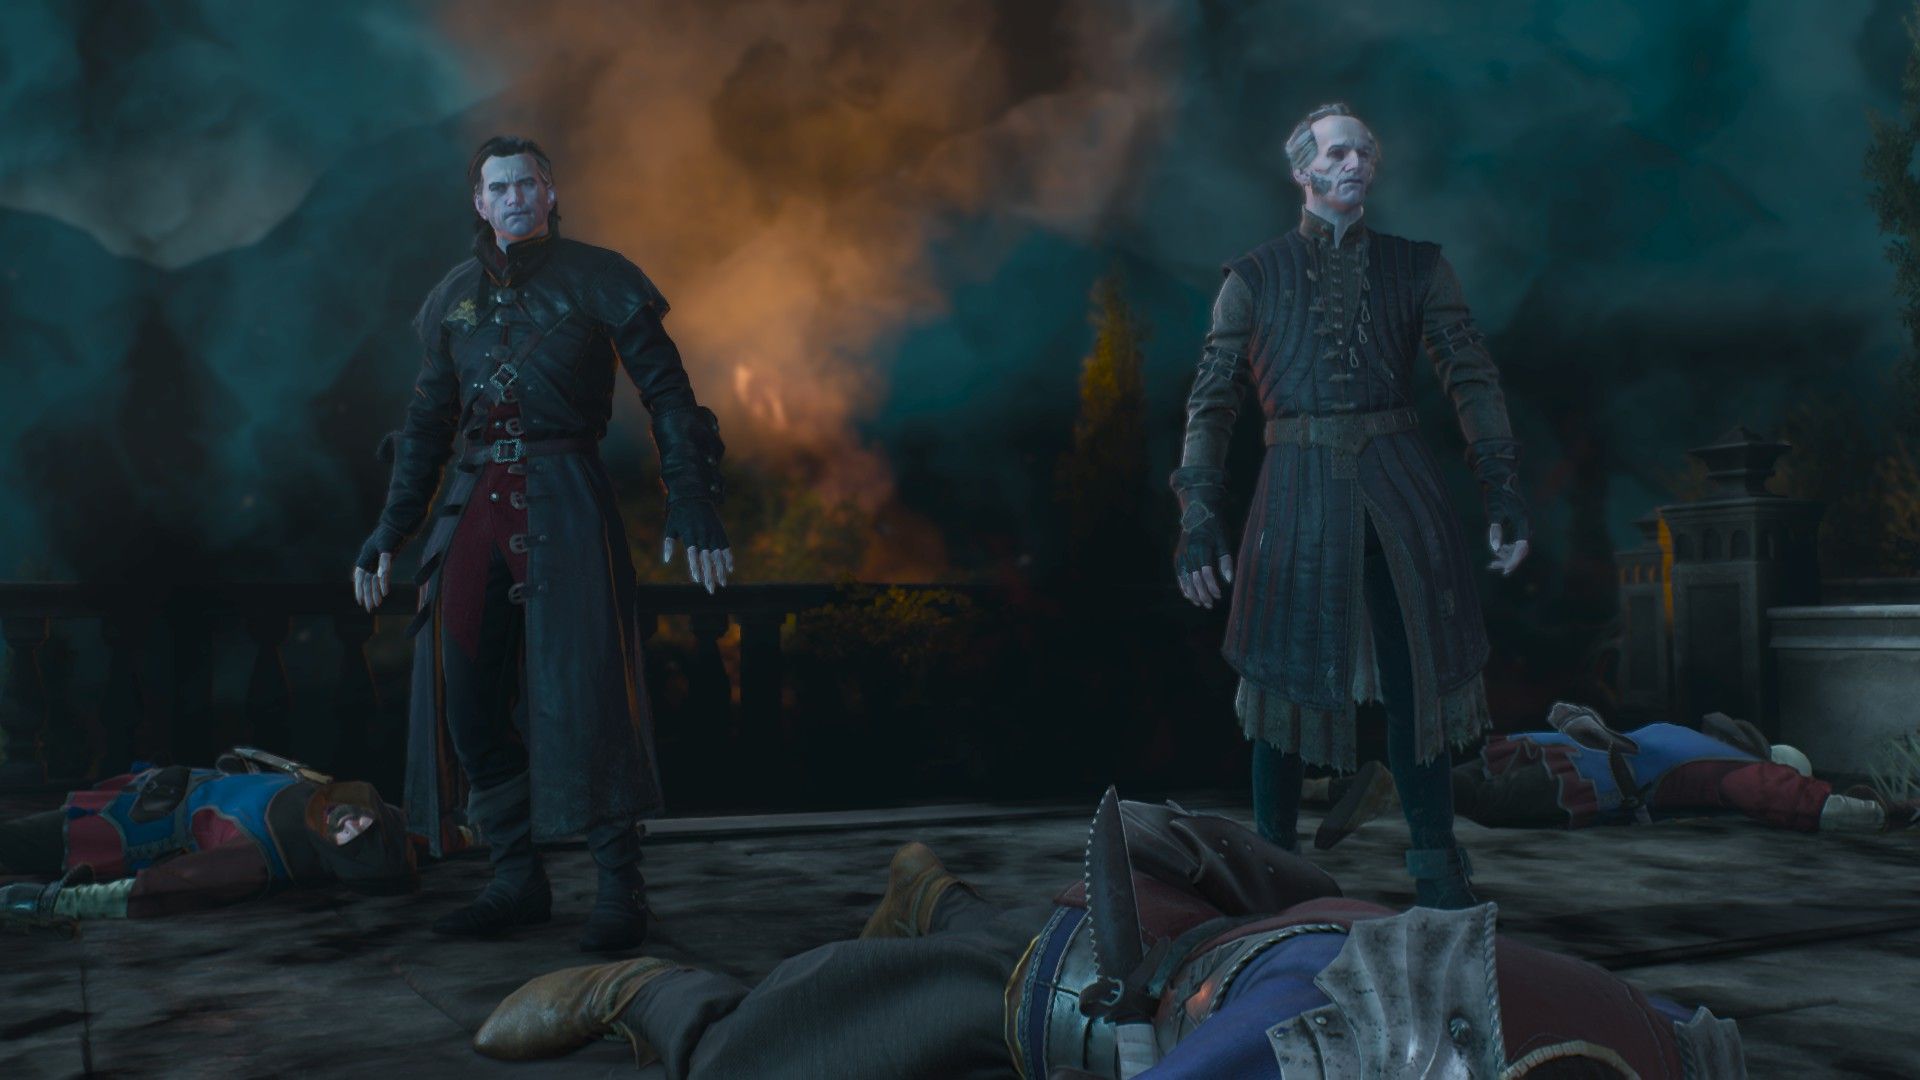 Regis and Dettlaff are standing in the middle of a pile of corpses when they come to help Geralt get to the castle.